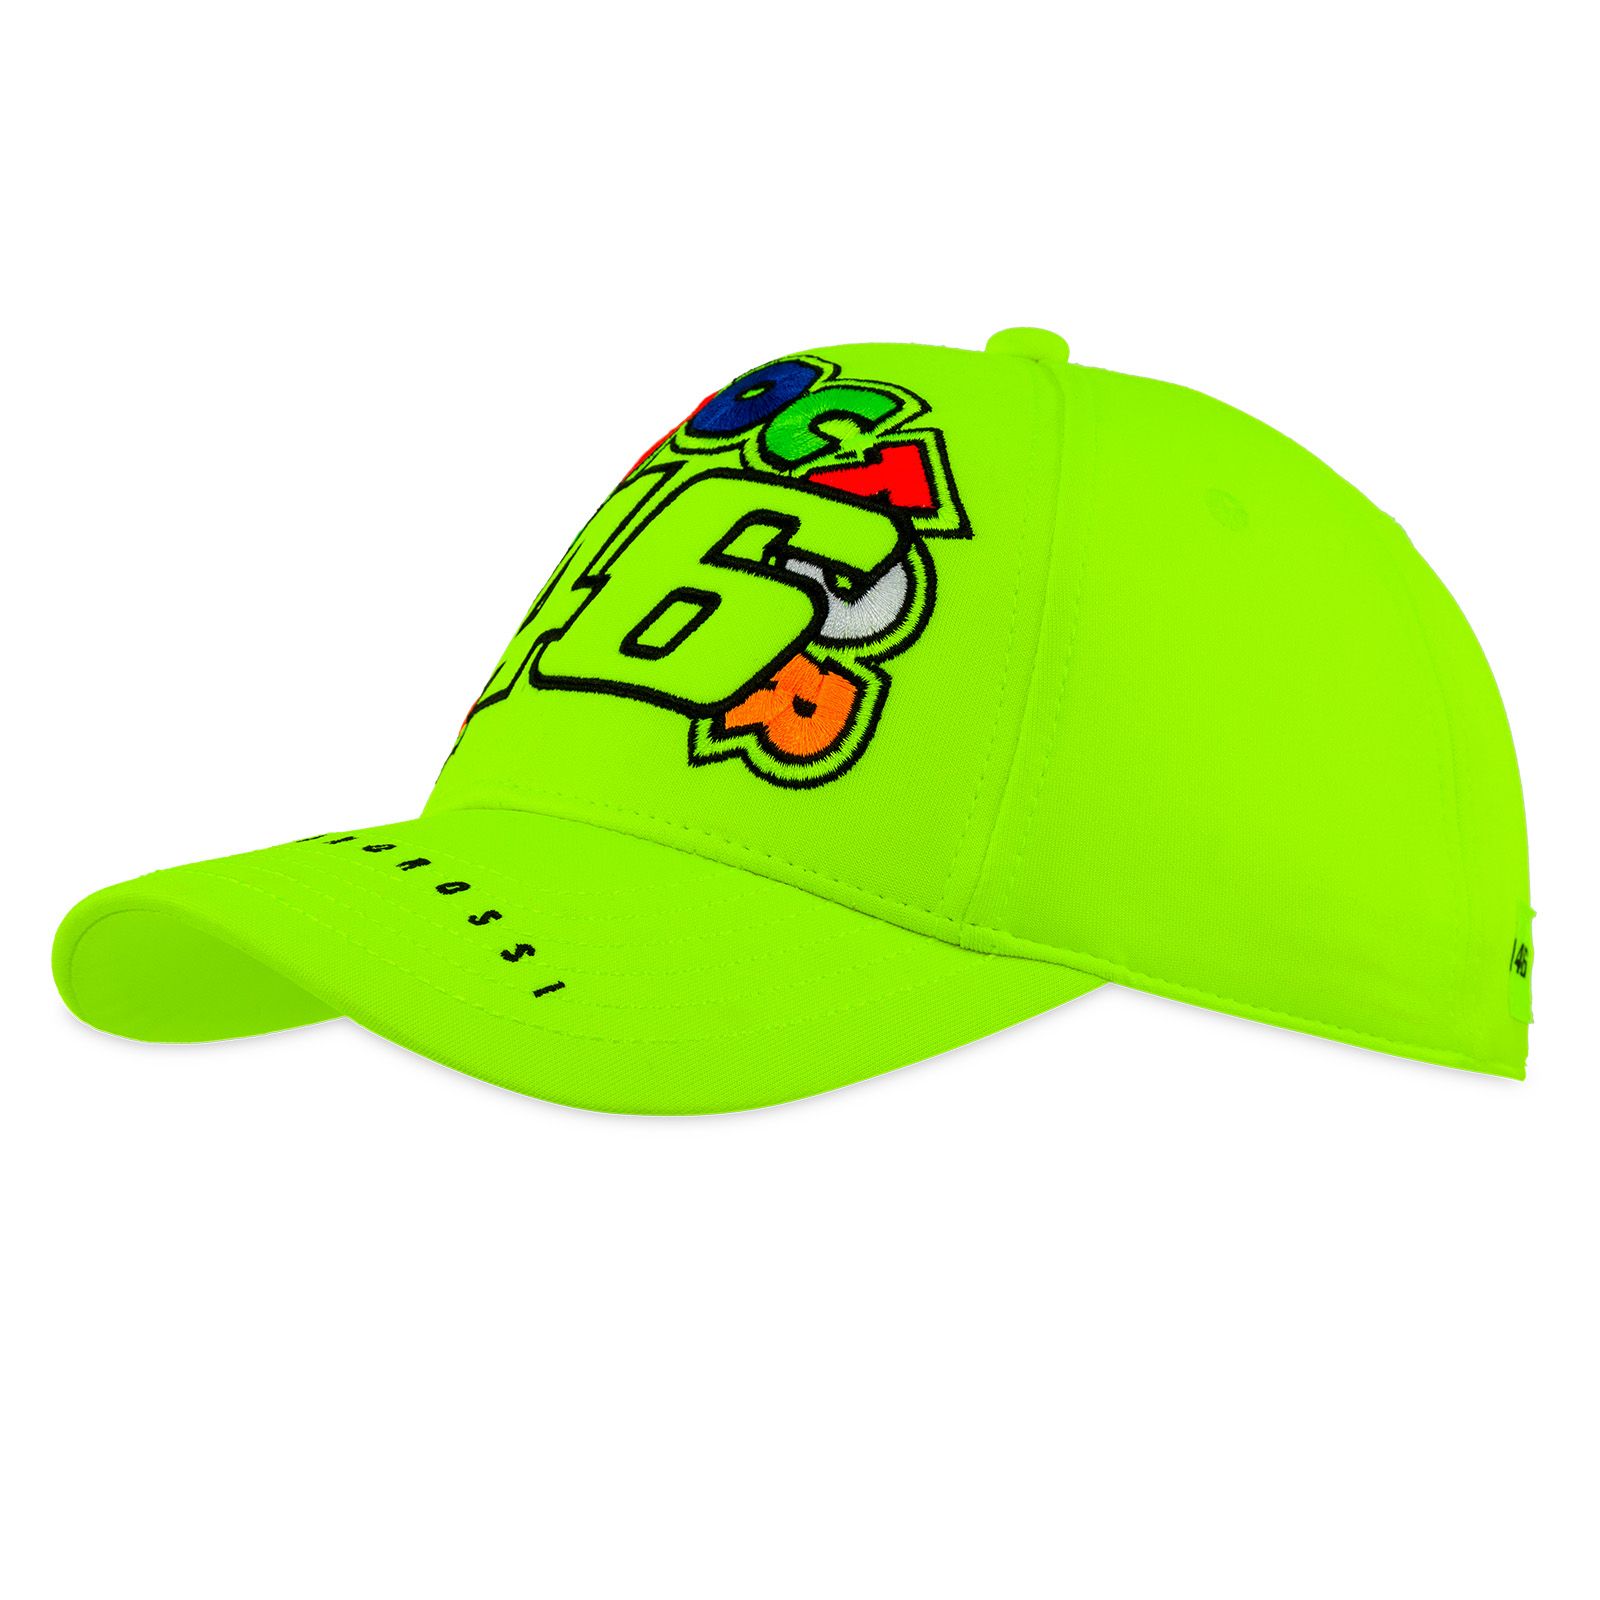 Image of Casquette VR 46 VR46 - ENFANT FLUO YELLOW